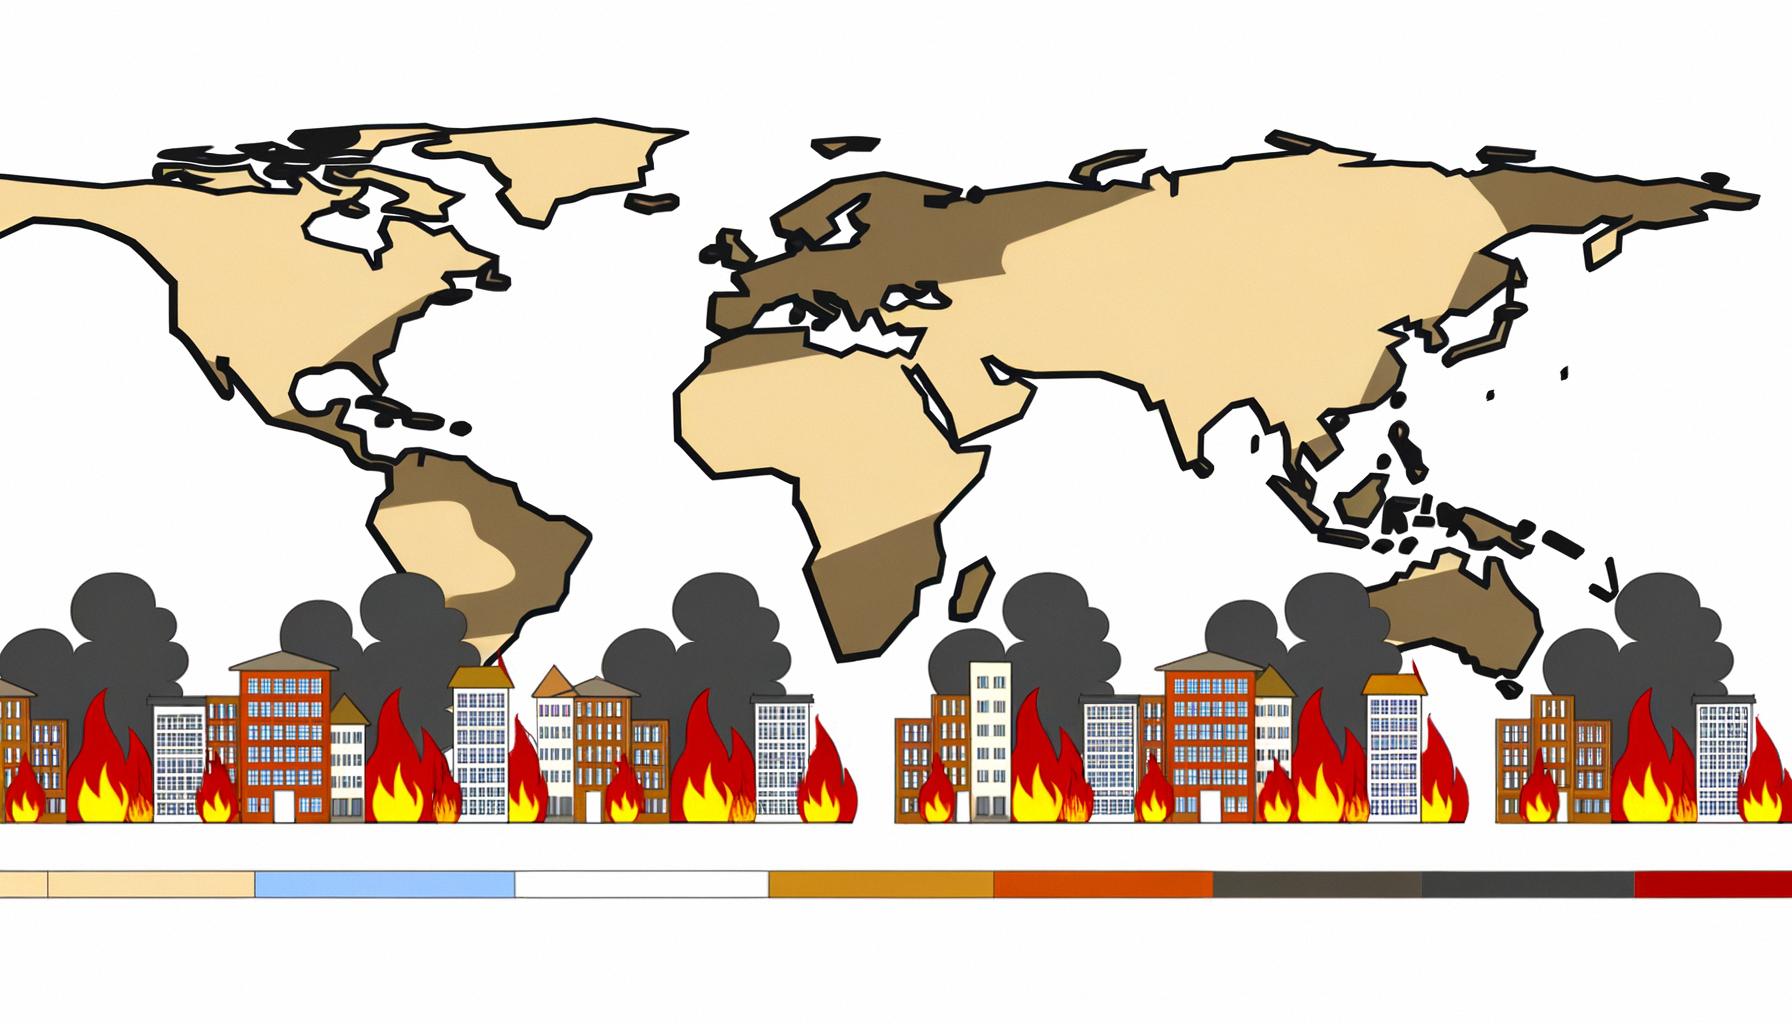 Multiple arson incidents reported globally Balanced News